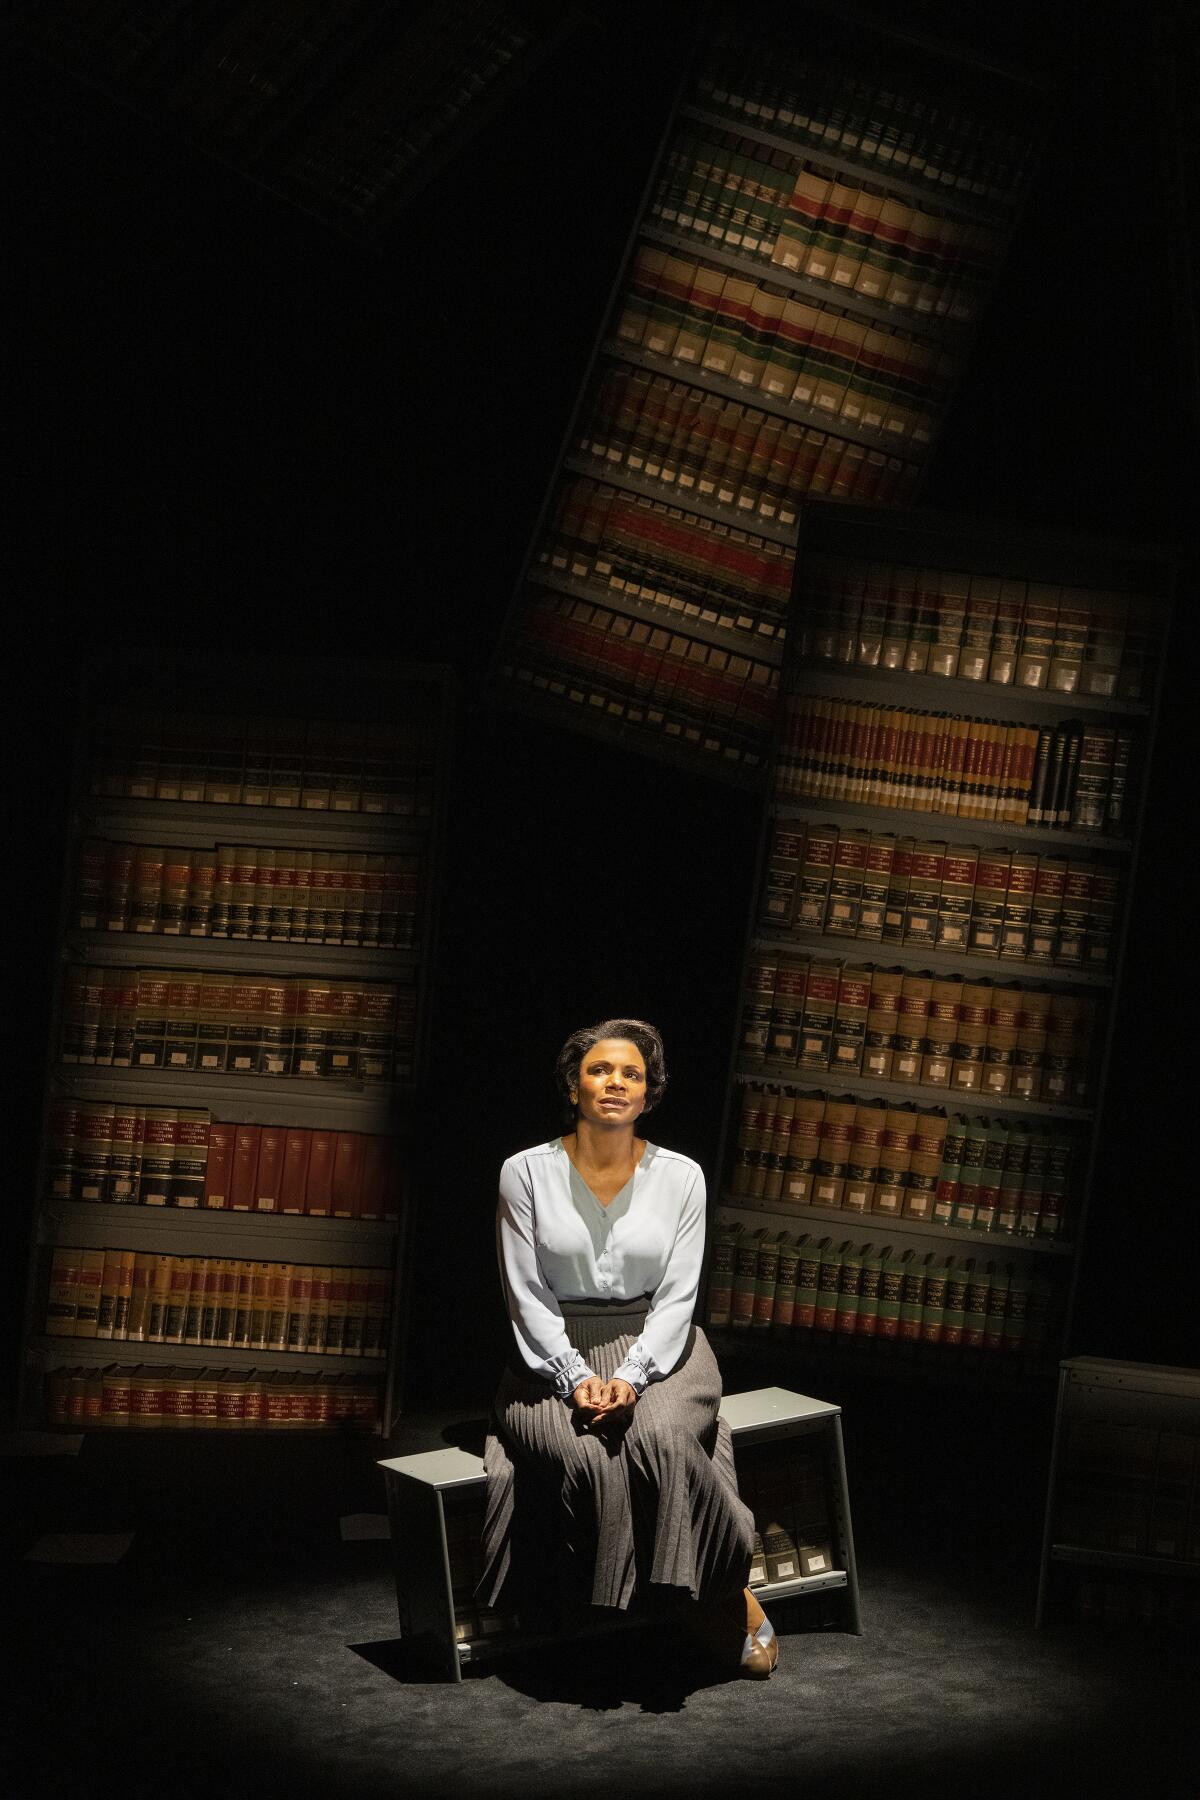 An actor sits onstage in front of bookshelves.